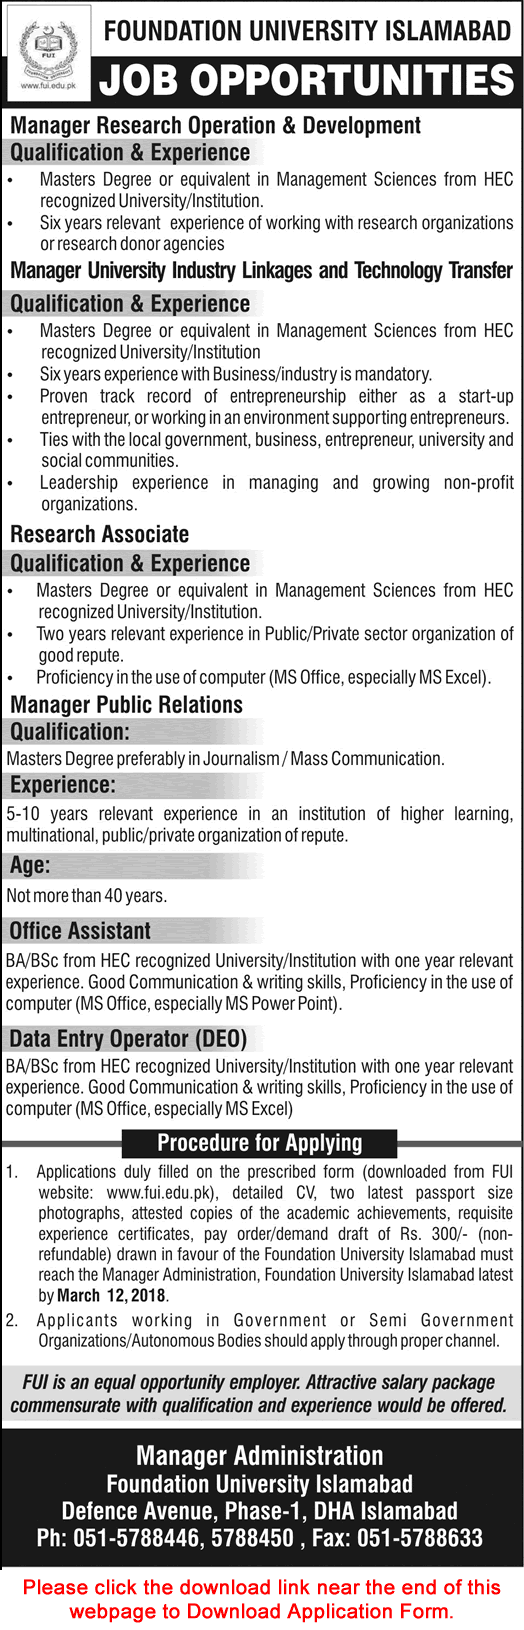 Foundation University Islamabad Jobs 2018 February Application Form Office Assistant, DEO & Others Latest